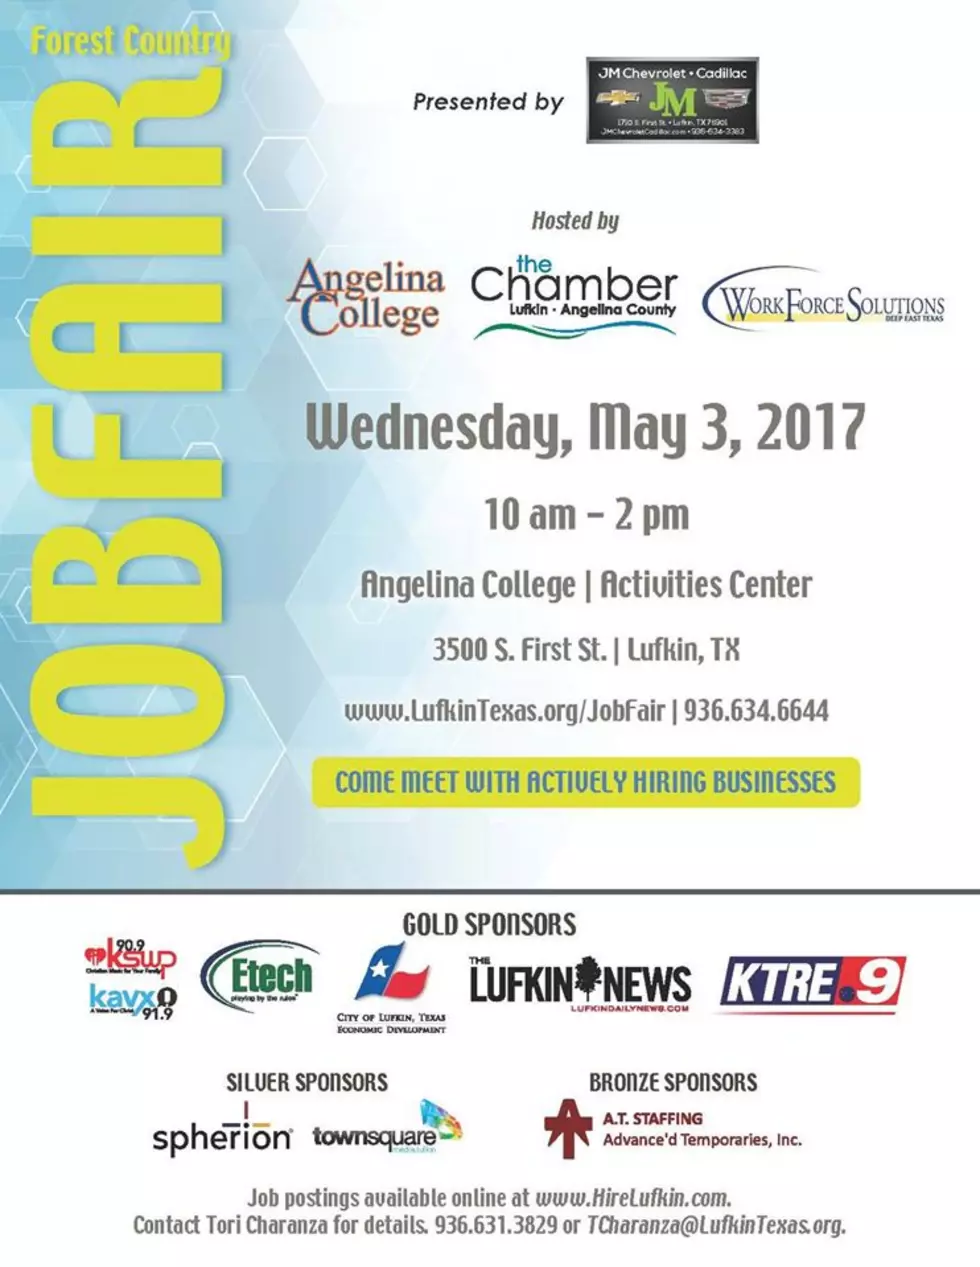 The Forest Country Job Fair is on Wednesday